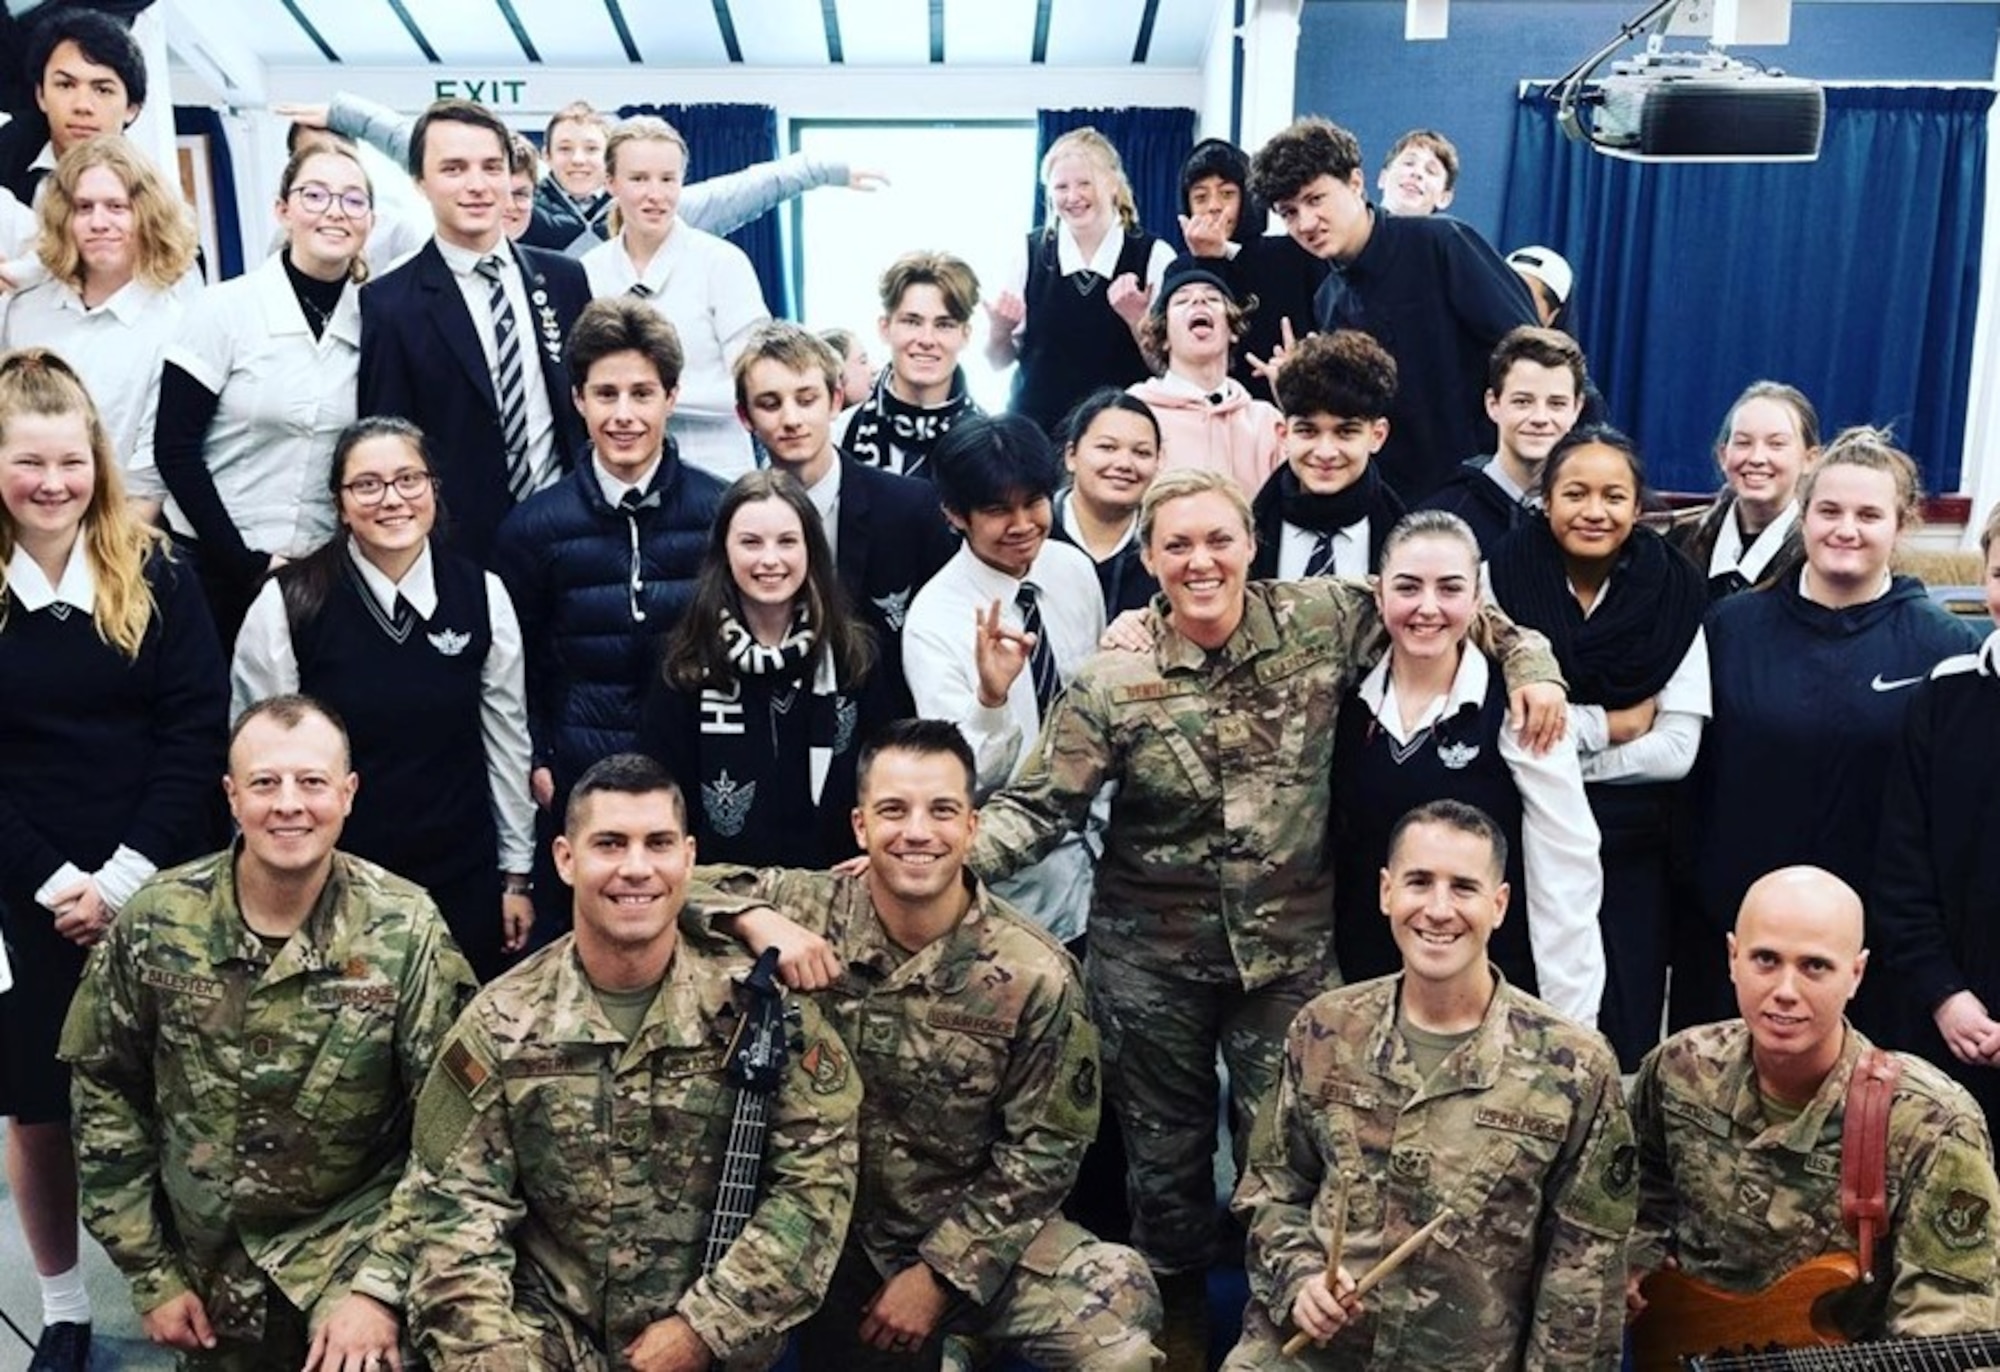 The members of Small Kine pose for a photo with the students of Hutt Valley High School in Wellington, New Zealand.